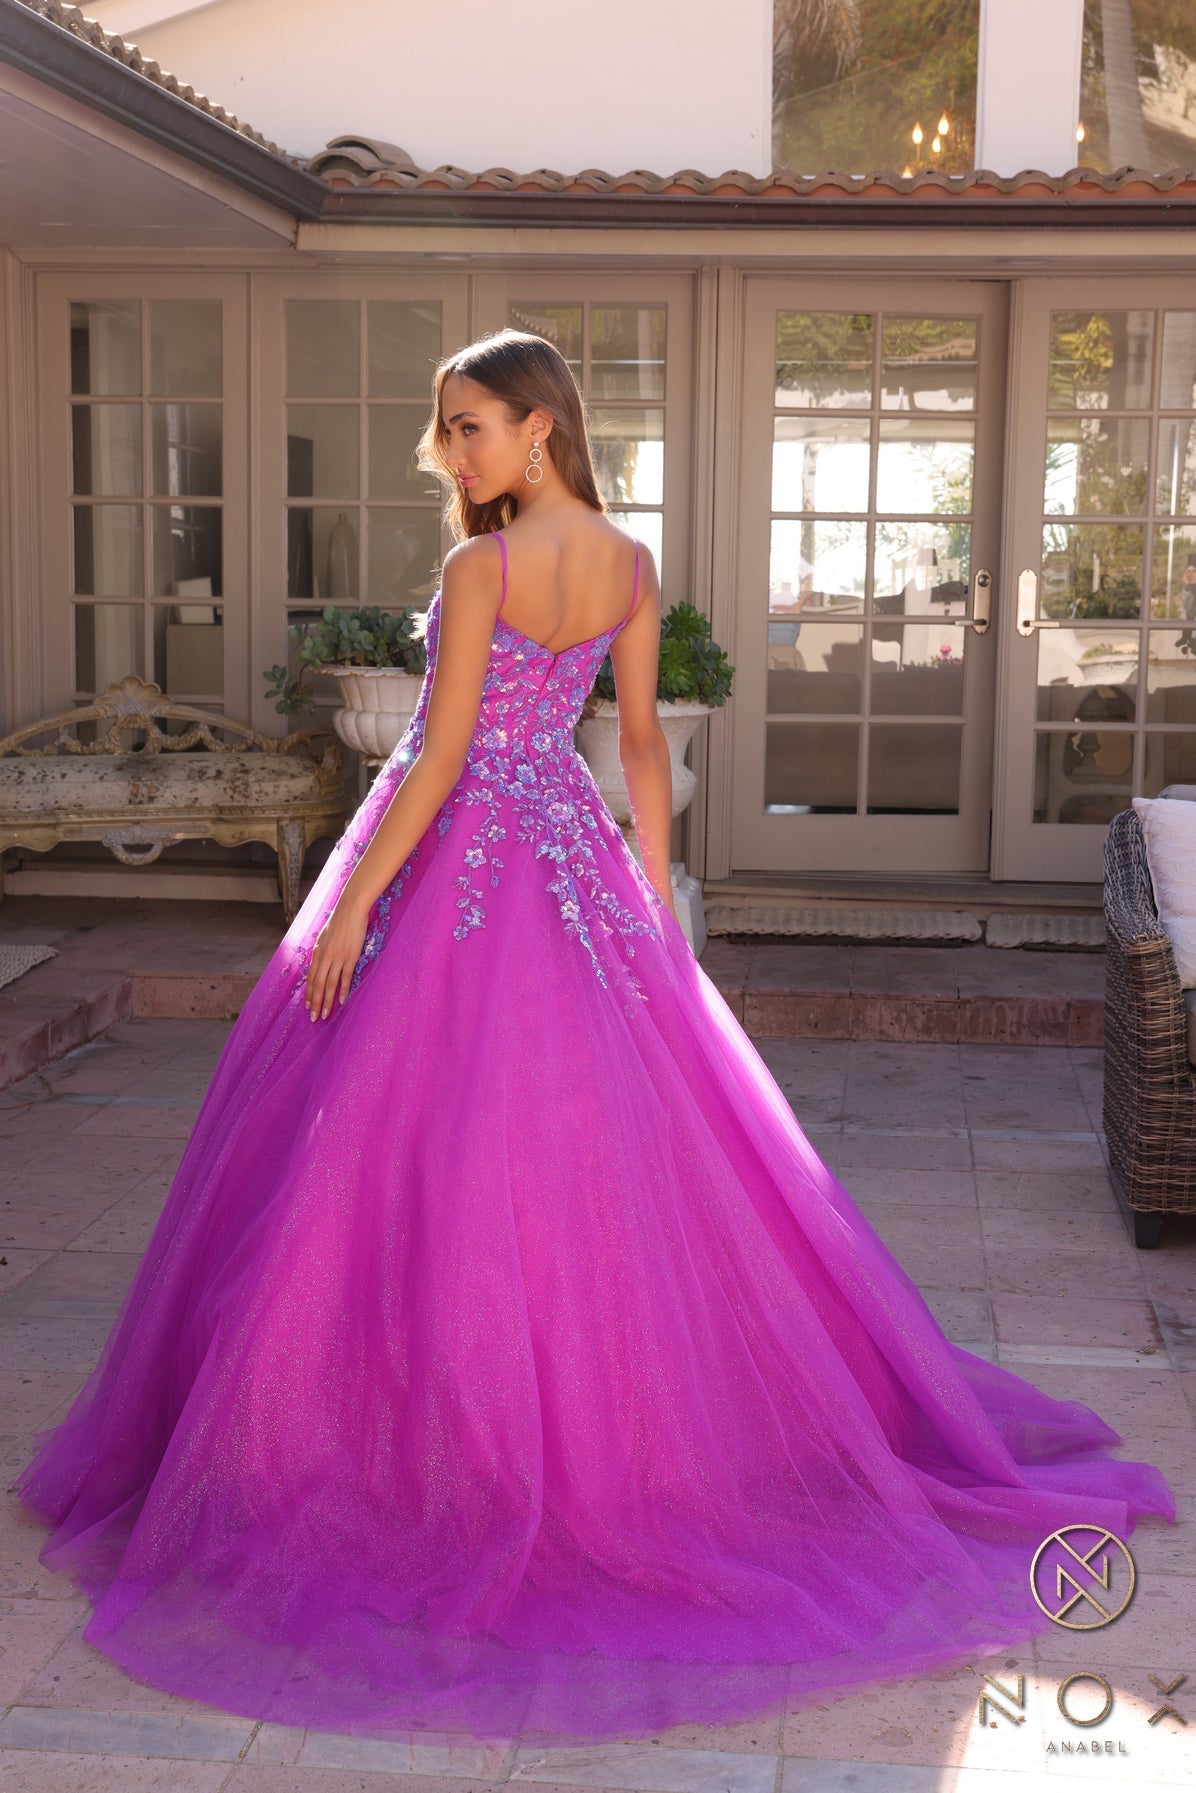 Introducing the Nox Anabel H1464 Prom Dress, the perfect blend of sophistication and glamour. Made with shimmery tulle and adorned with sequins, this A-line dress is designed to make you shine on your special night. With a flattering scoop neck and elegant pageant look, this dress will make you feel like a true star.  Sizes: 0-16  Colors: Hunter Green, Hot Pink, Purple